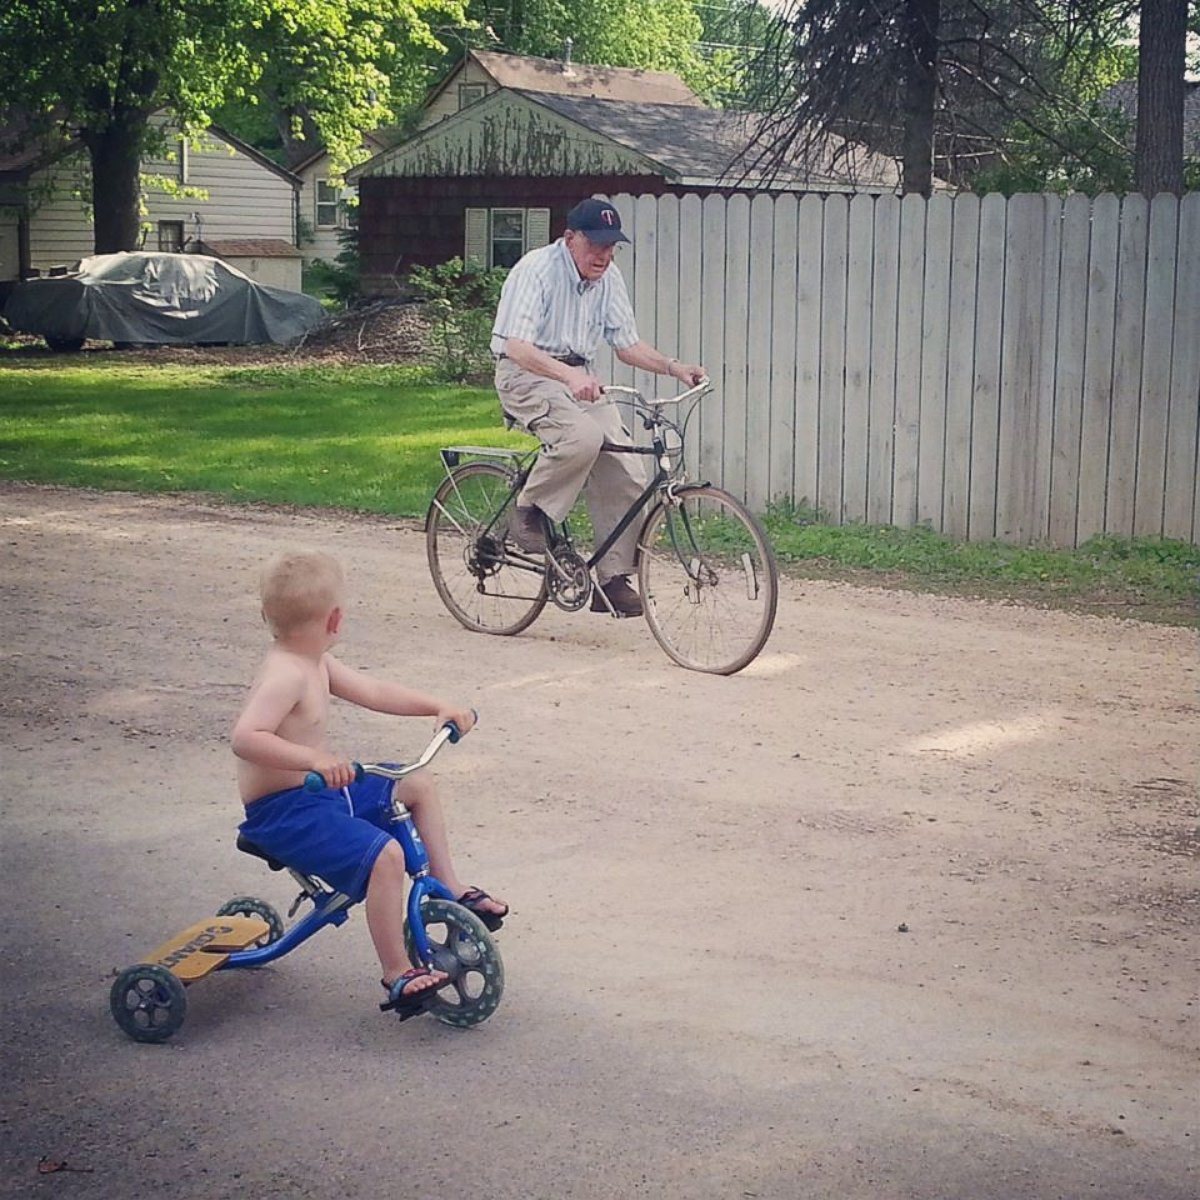 PHOTO: Emmett, left, and Erling biking together near the house.